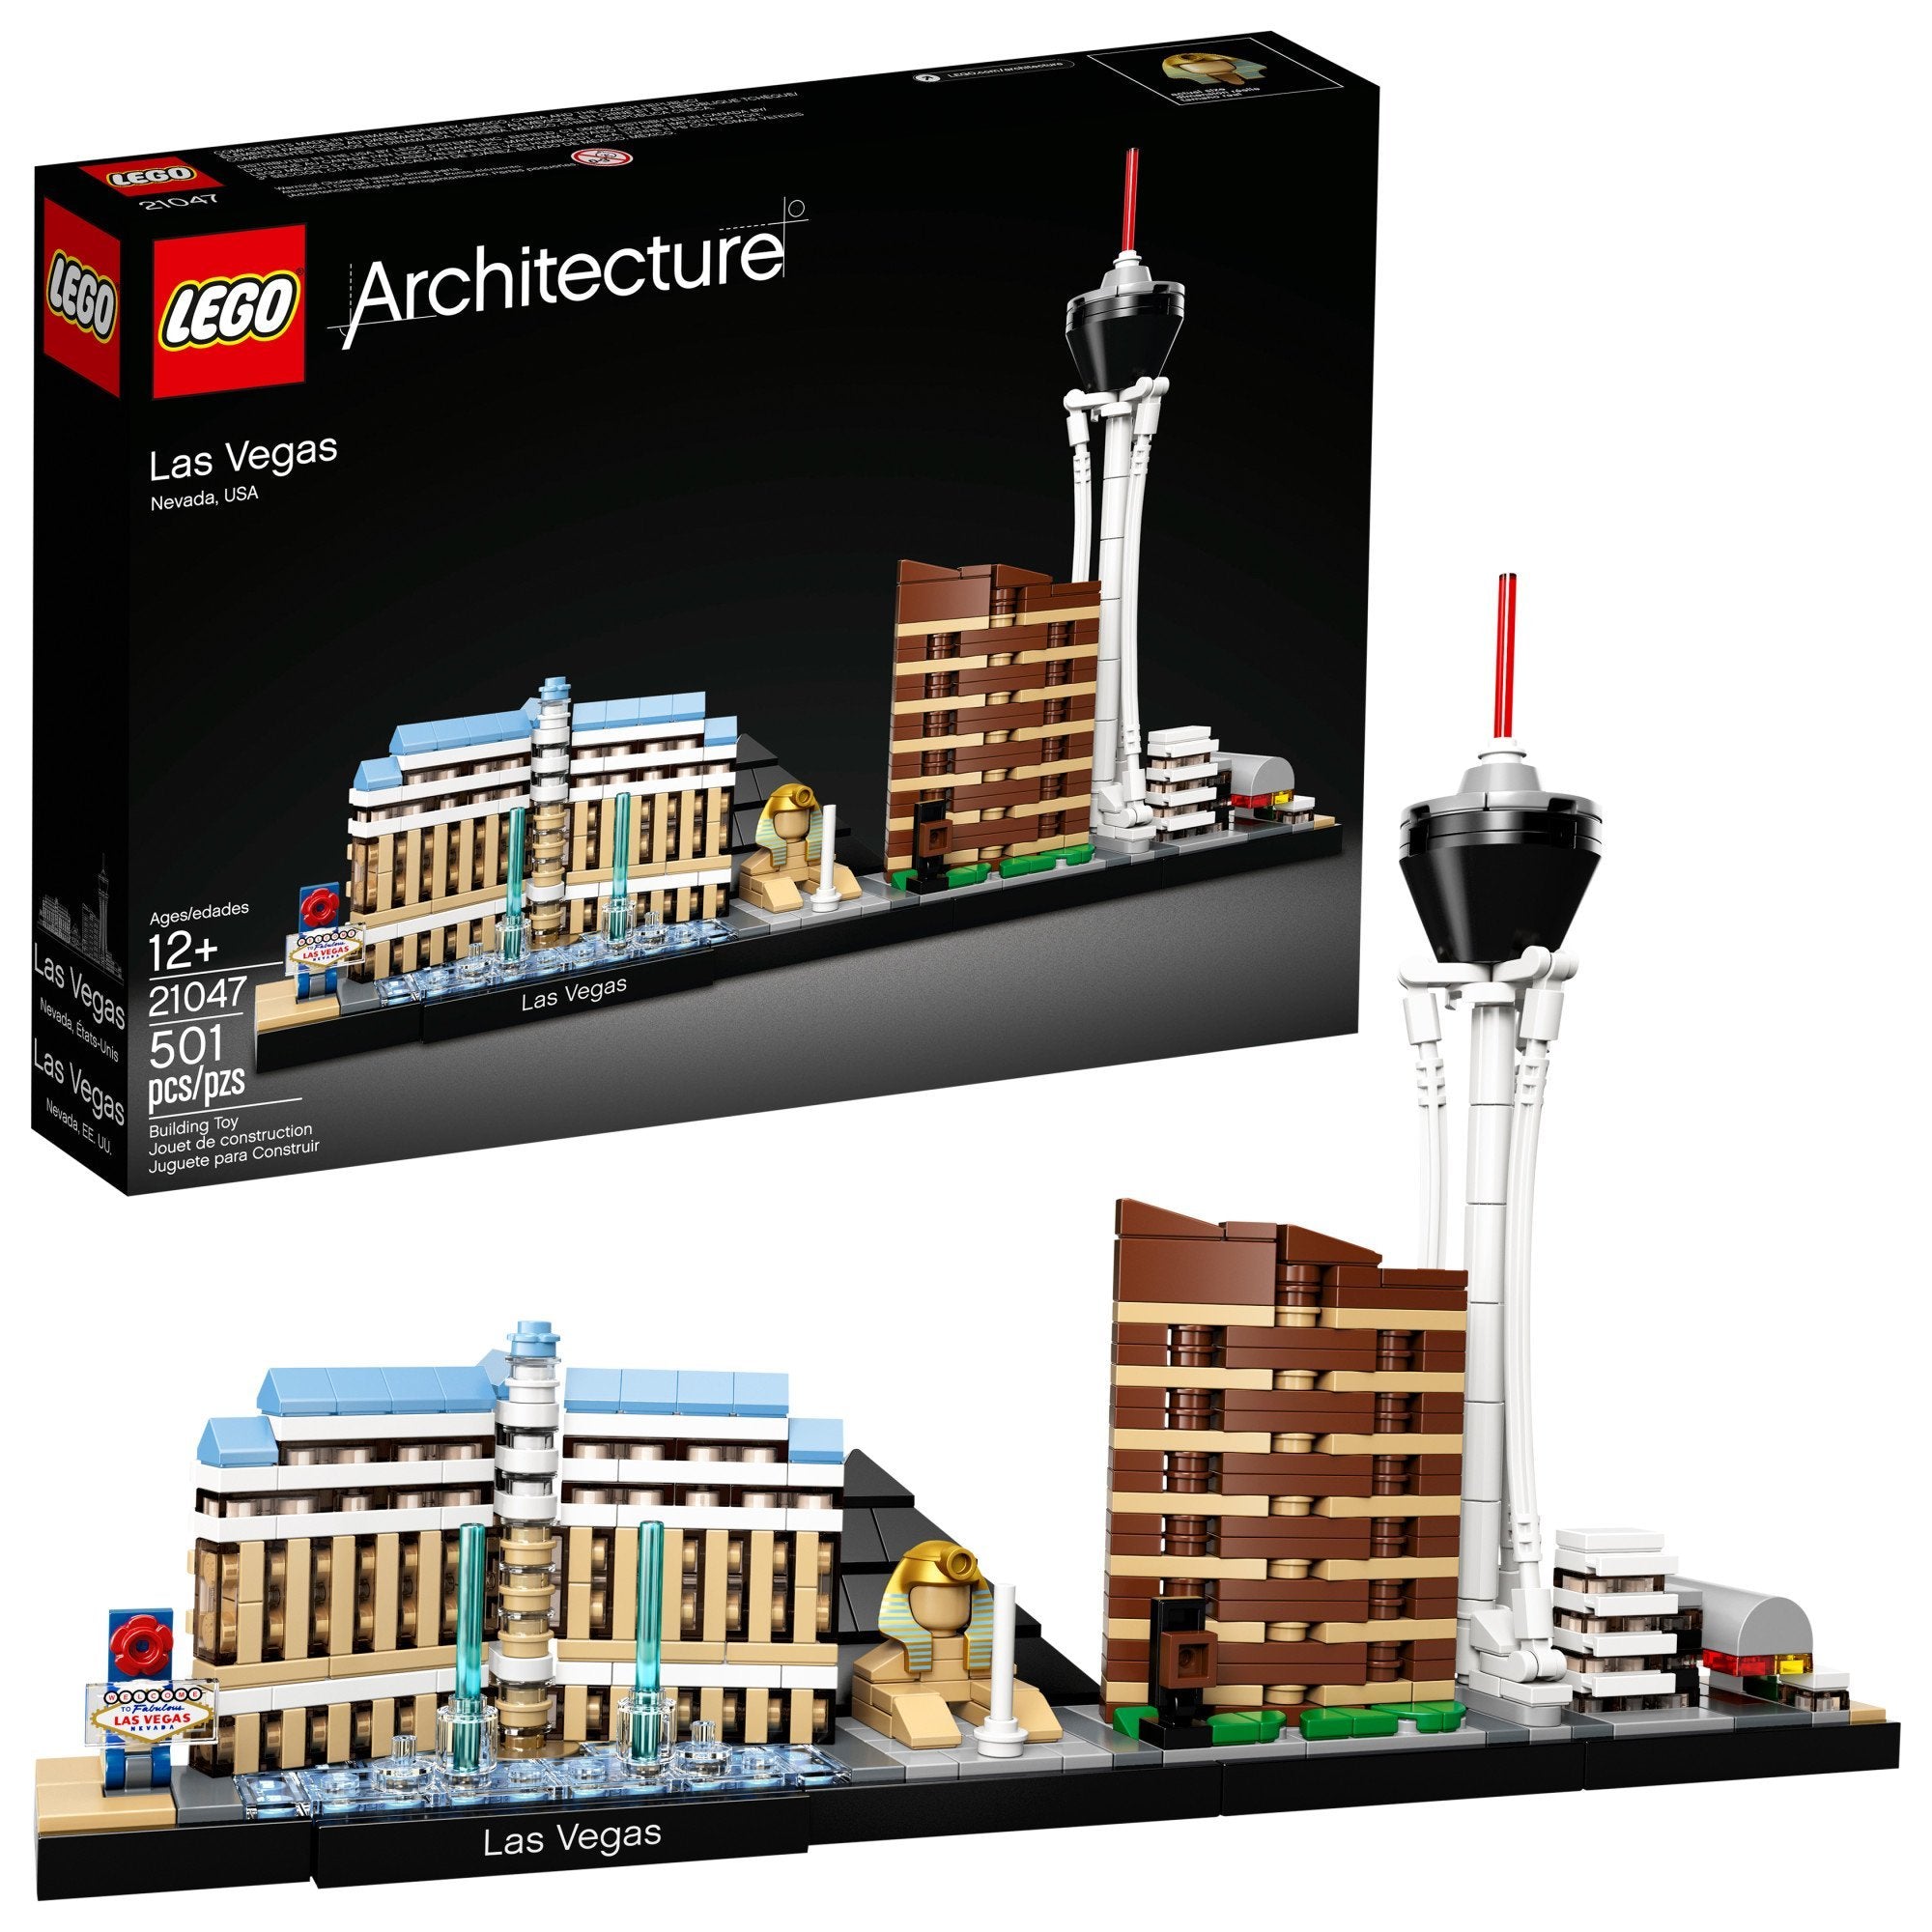 Let's Go - LEGO Architecture 21047 Las Vegas is coming ! 21038 cancelled  reason :- The initial set with the 21038 reference was temporarily removed  from the LEGO range before its sale